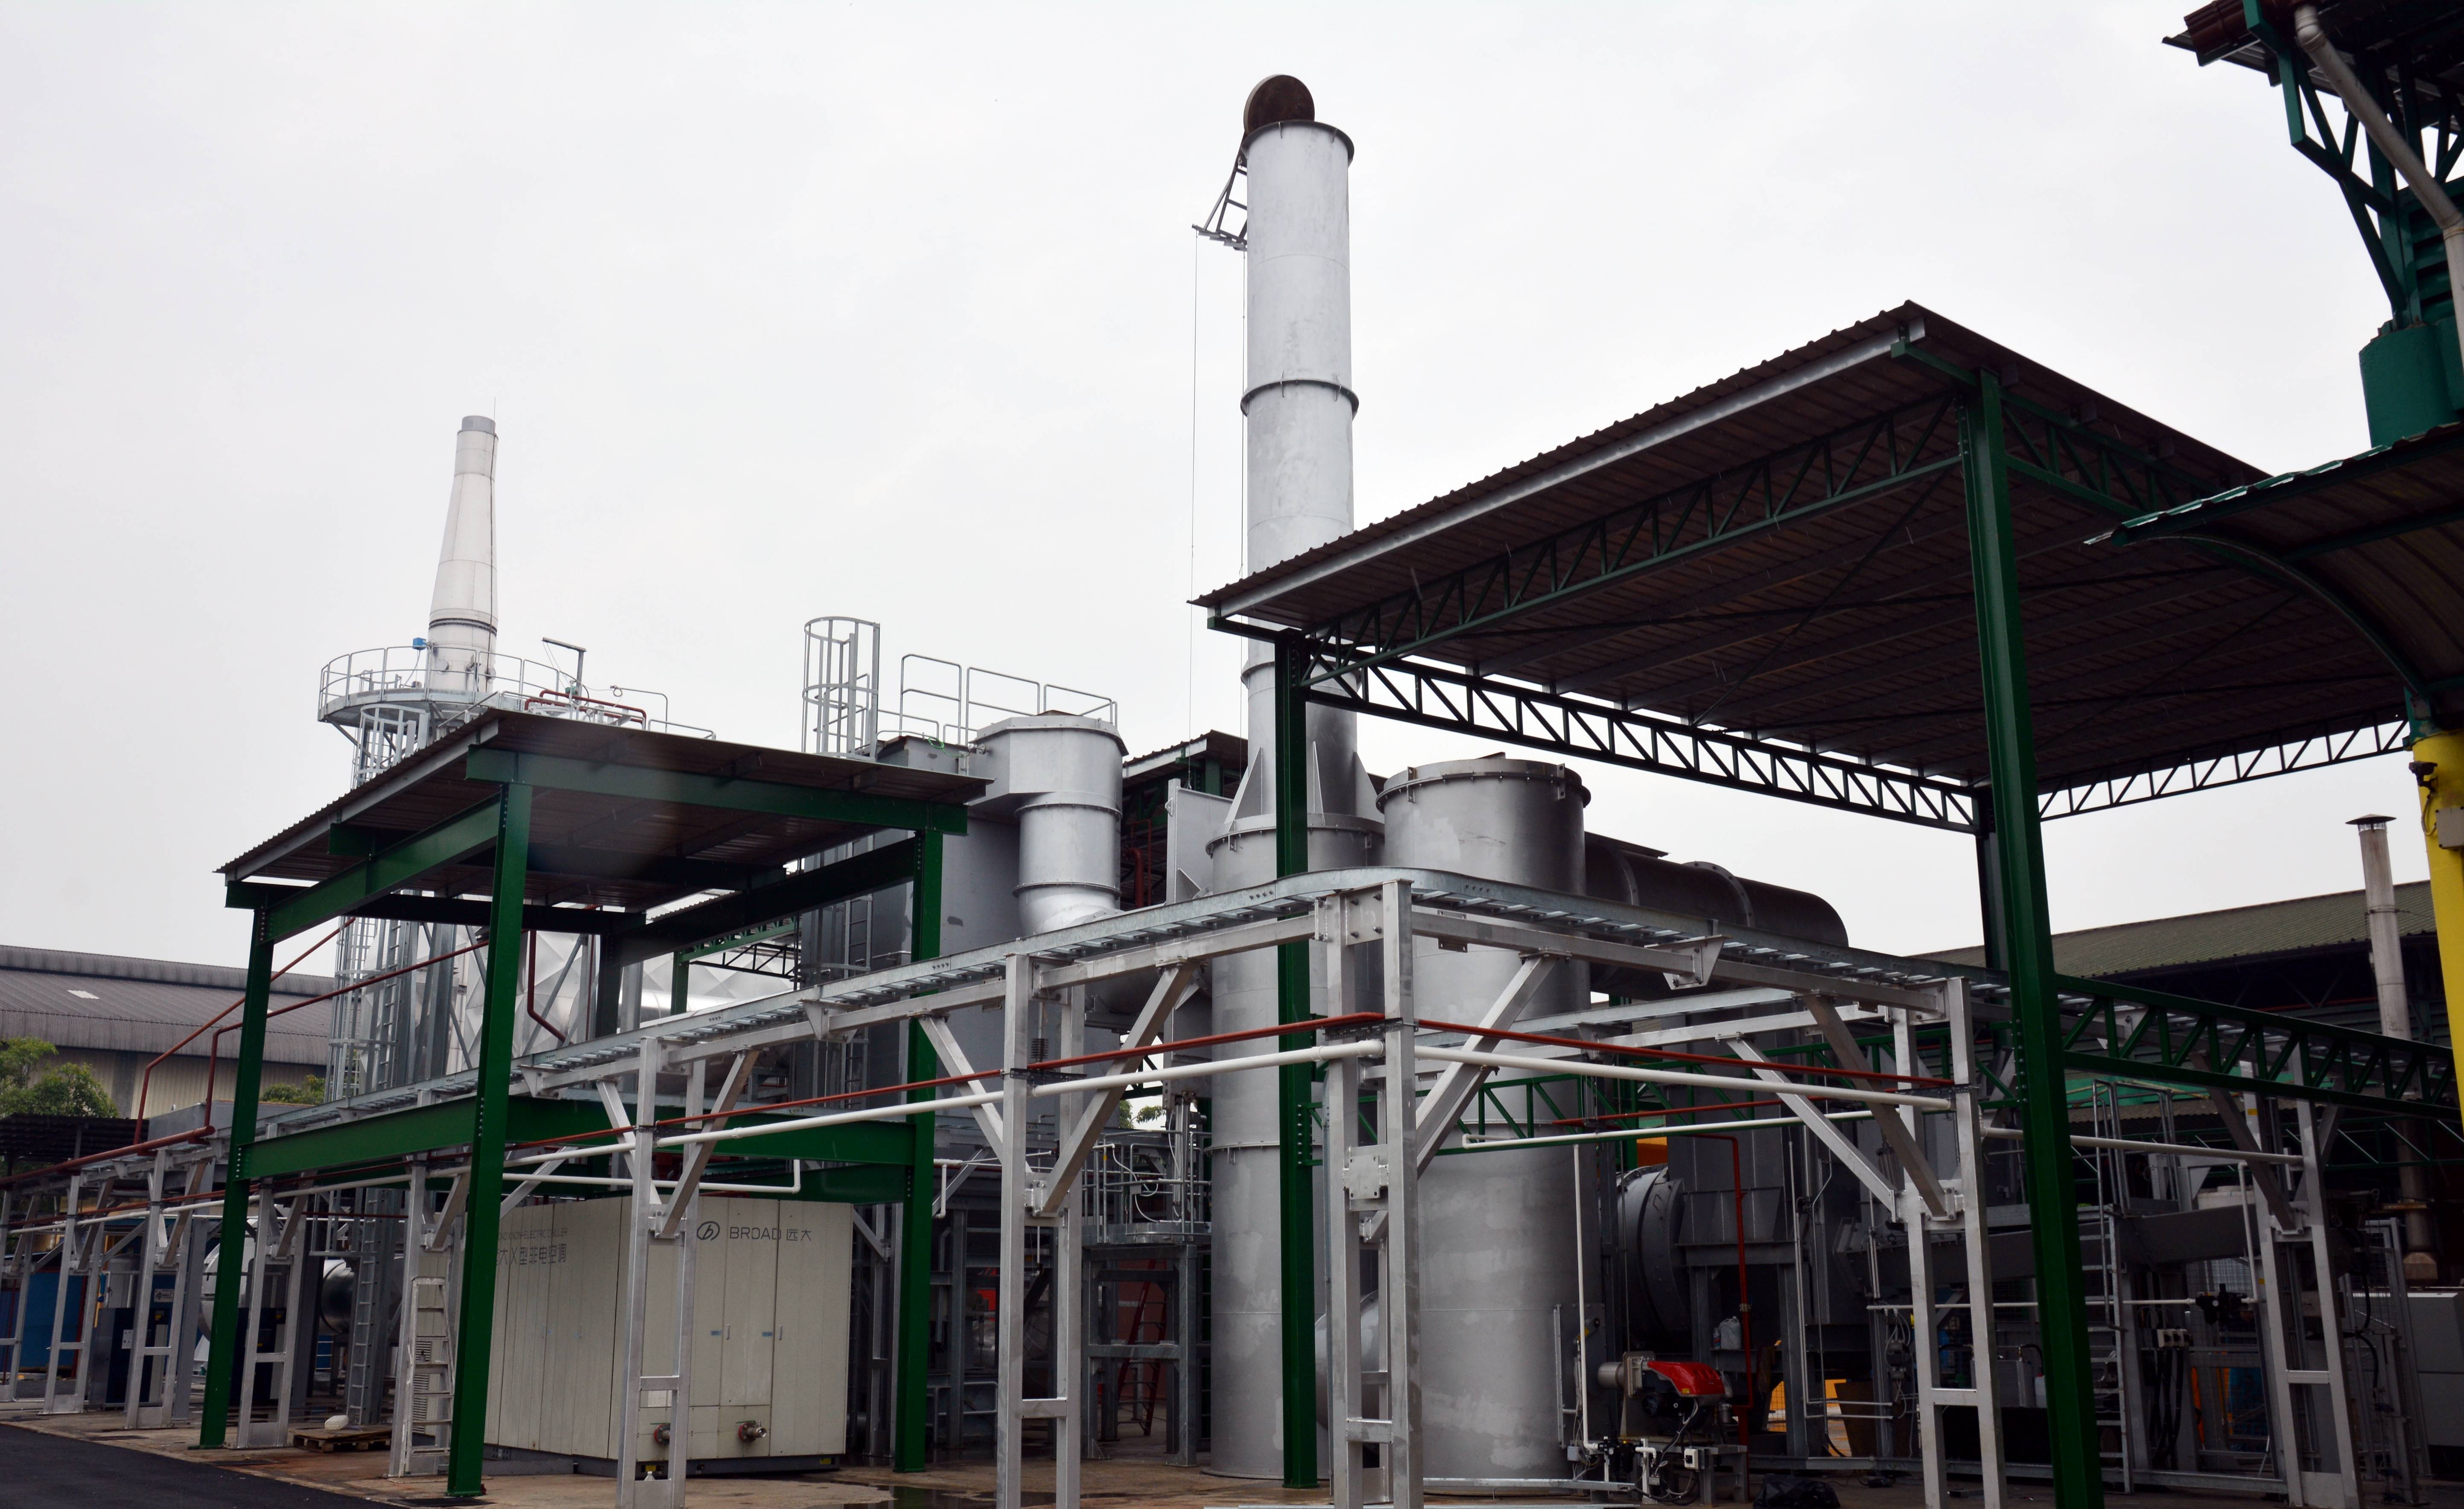 Combustible Incineration Plant at Clinwaste 